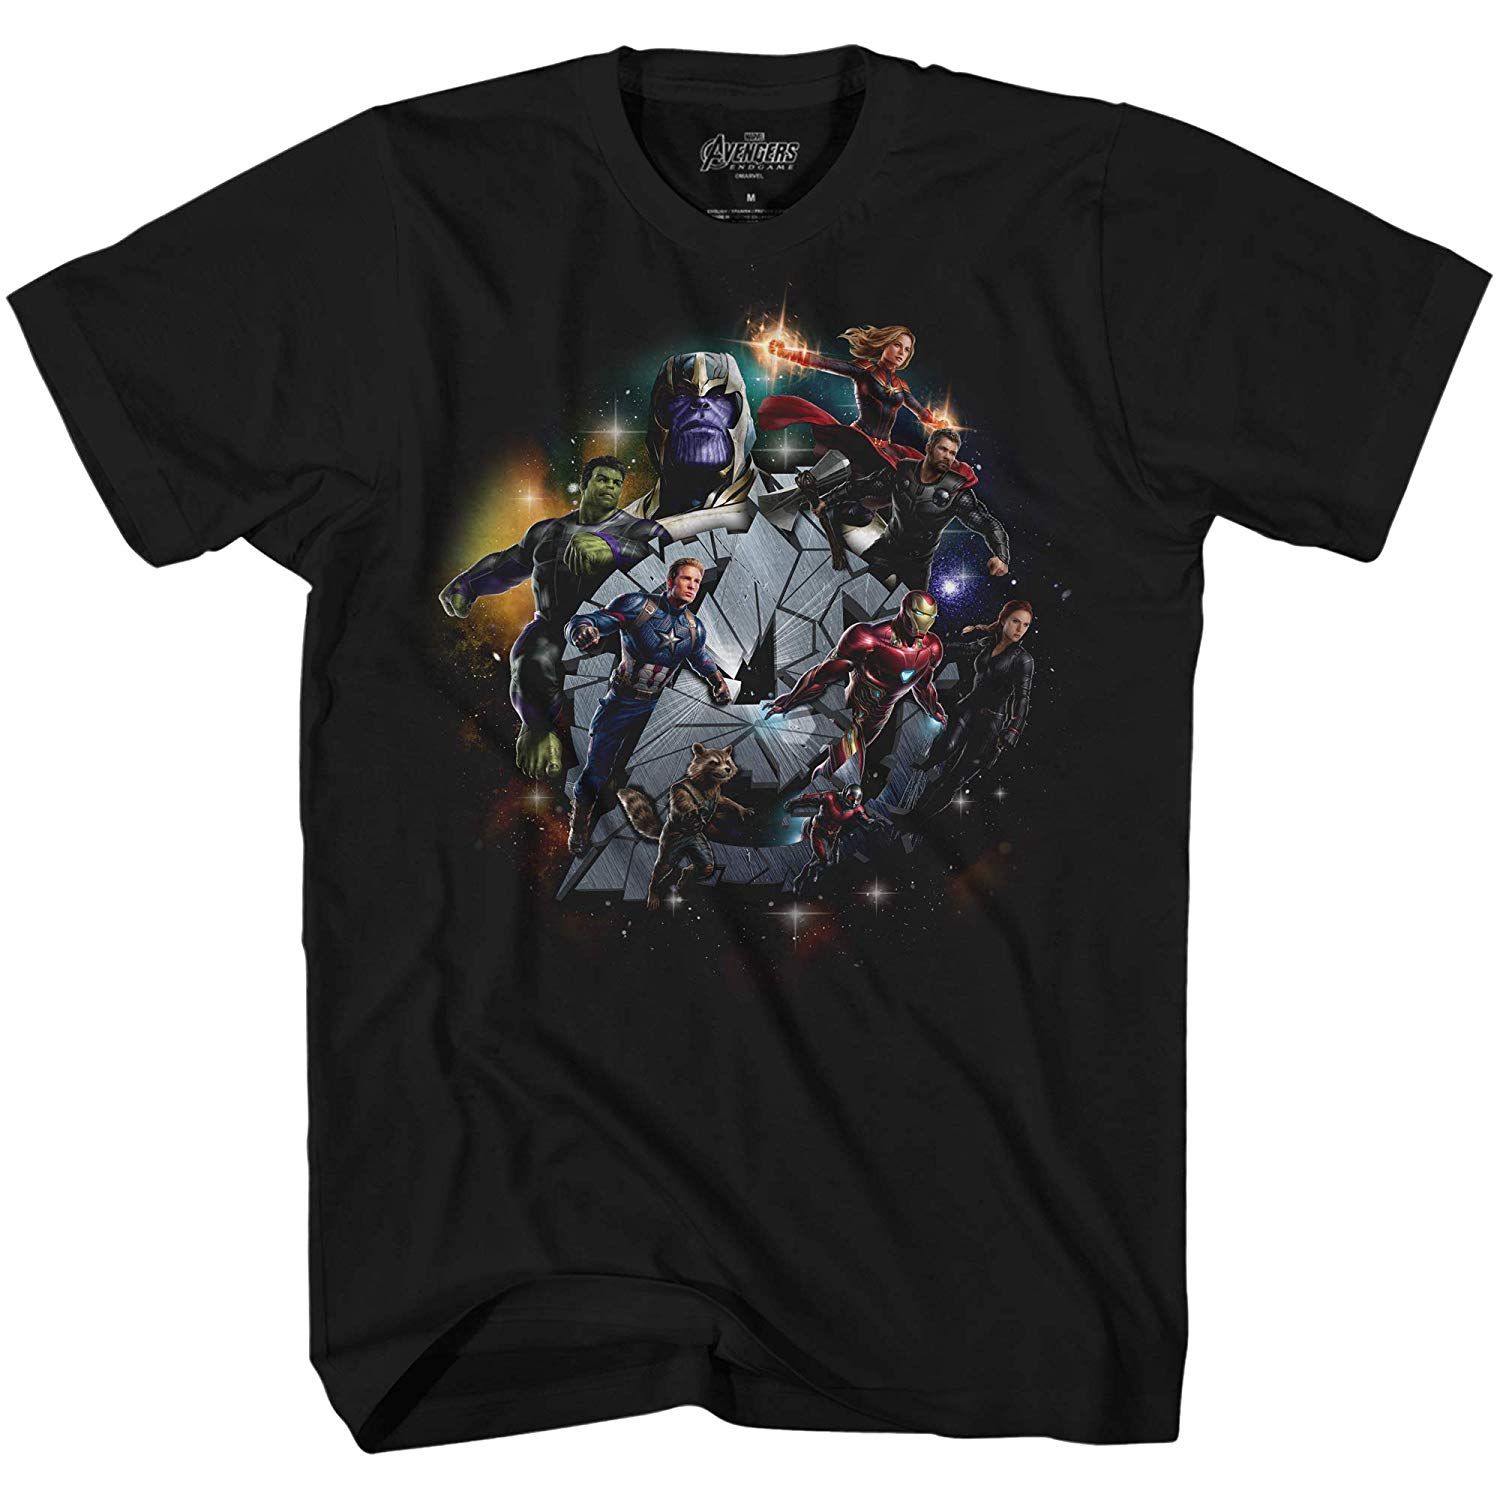 Avengers and Thanos T-shirt